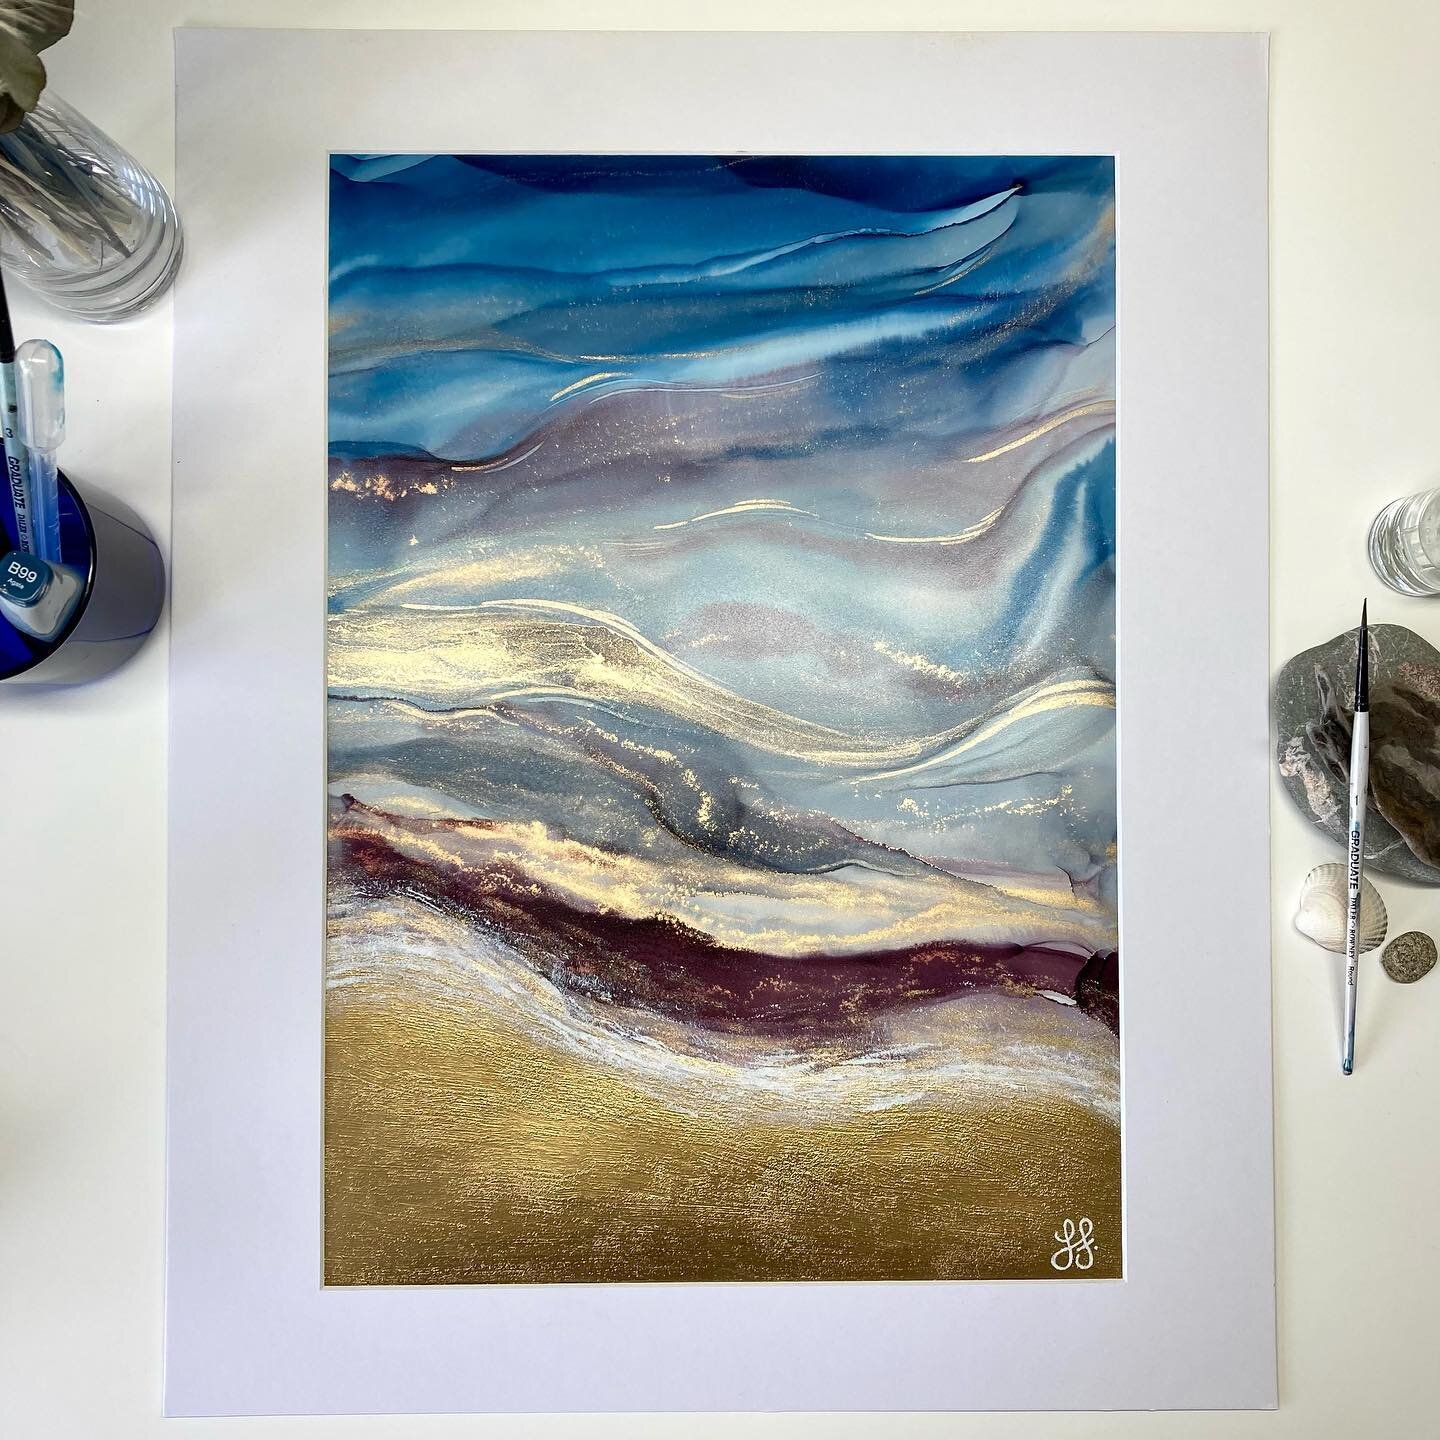 The water movement in the this painting reminds me of the ripples and reflections of Loch Lomond on a sunny day. 🥰

This painting will be added to the Golden Sands of Scotland collection on my website next weekend. The pieces in this collection are 